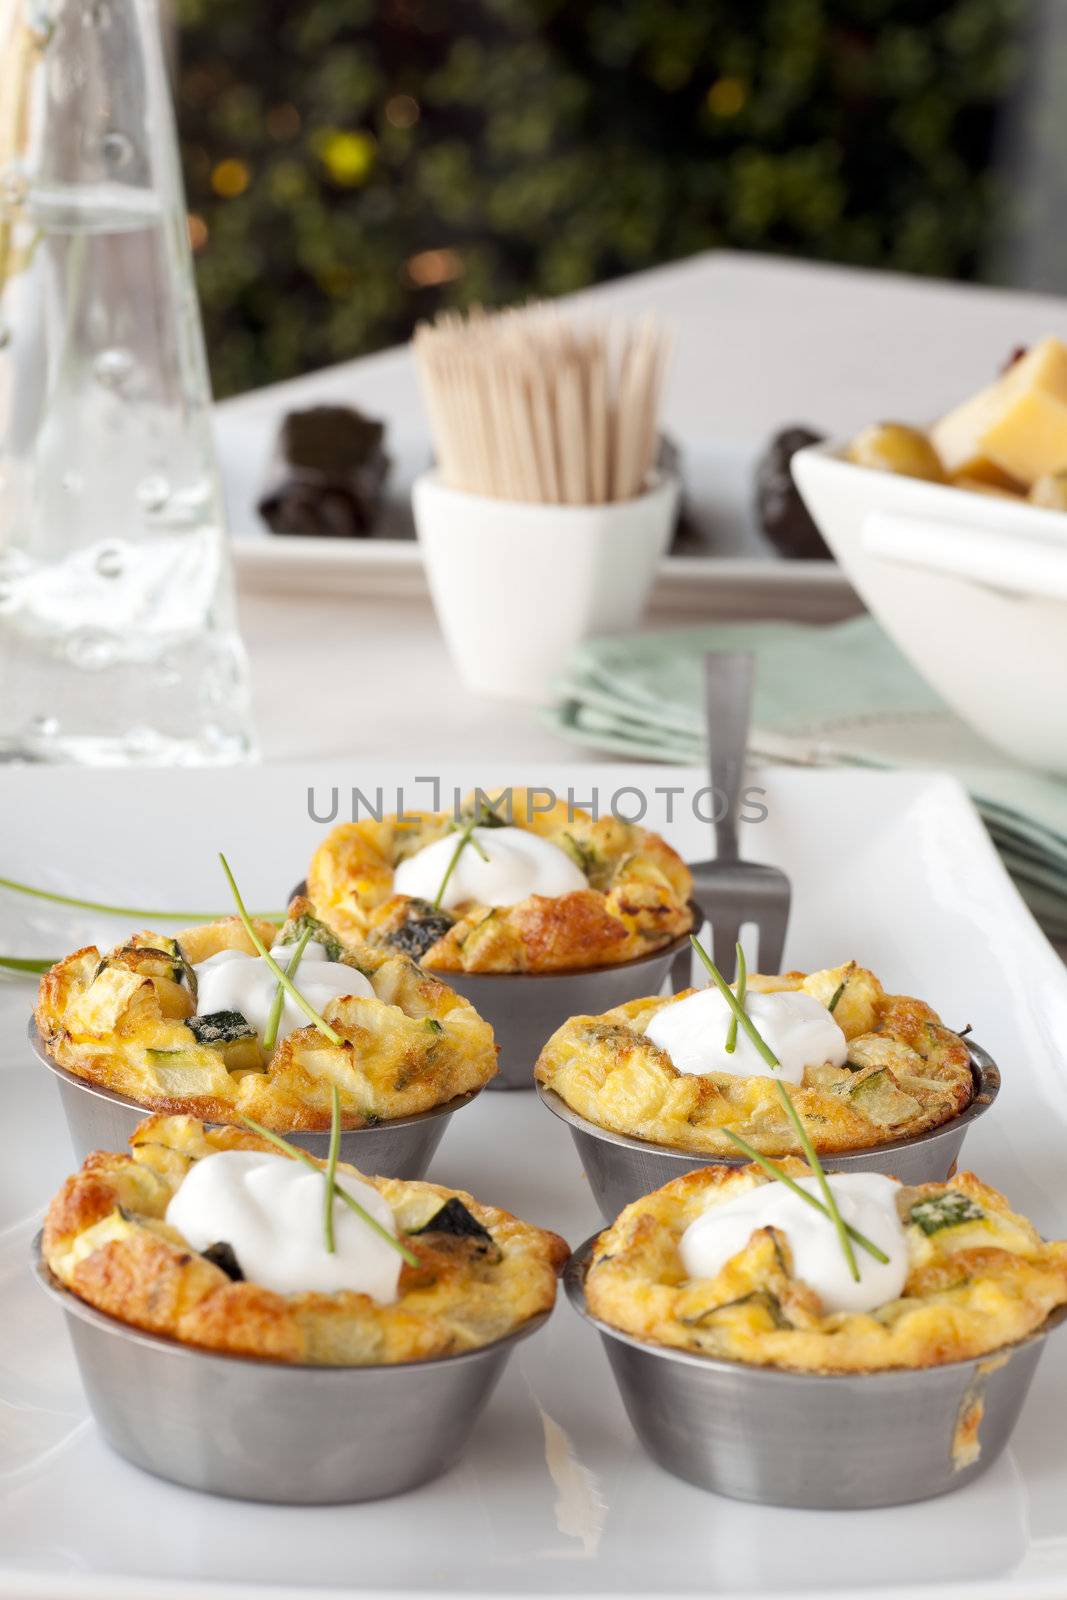 Five quiche appetizers topped with sour cream and chives.